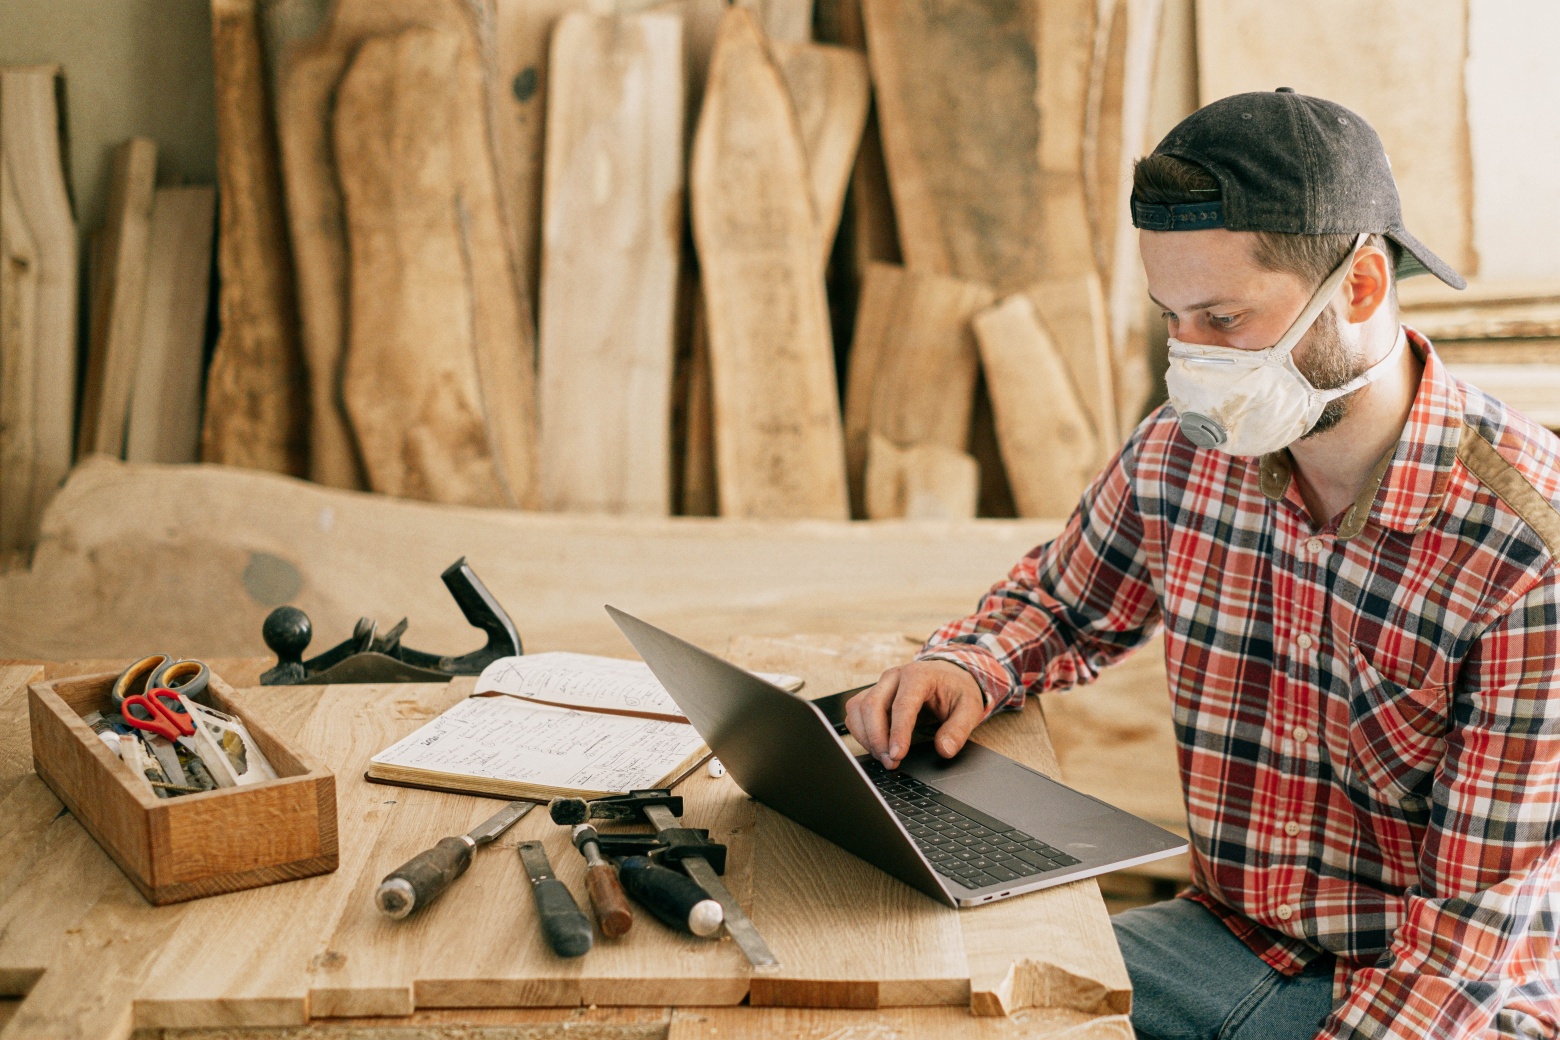 Man with mask on sitting by his laptop with engineering tools around